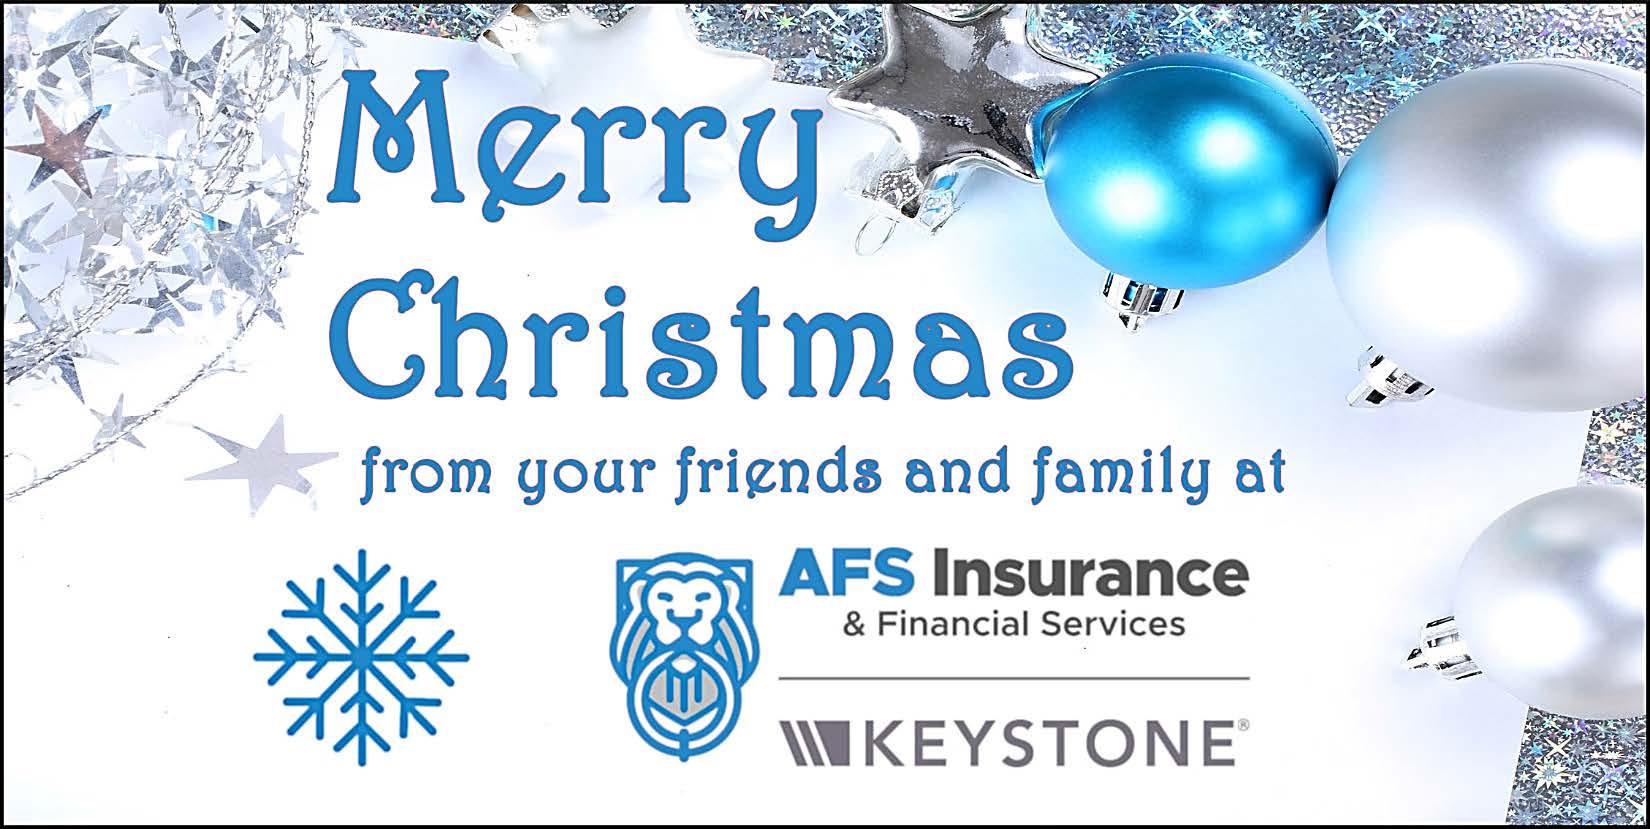 AFS Christmas newsletter